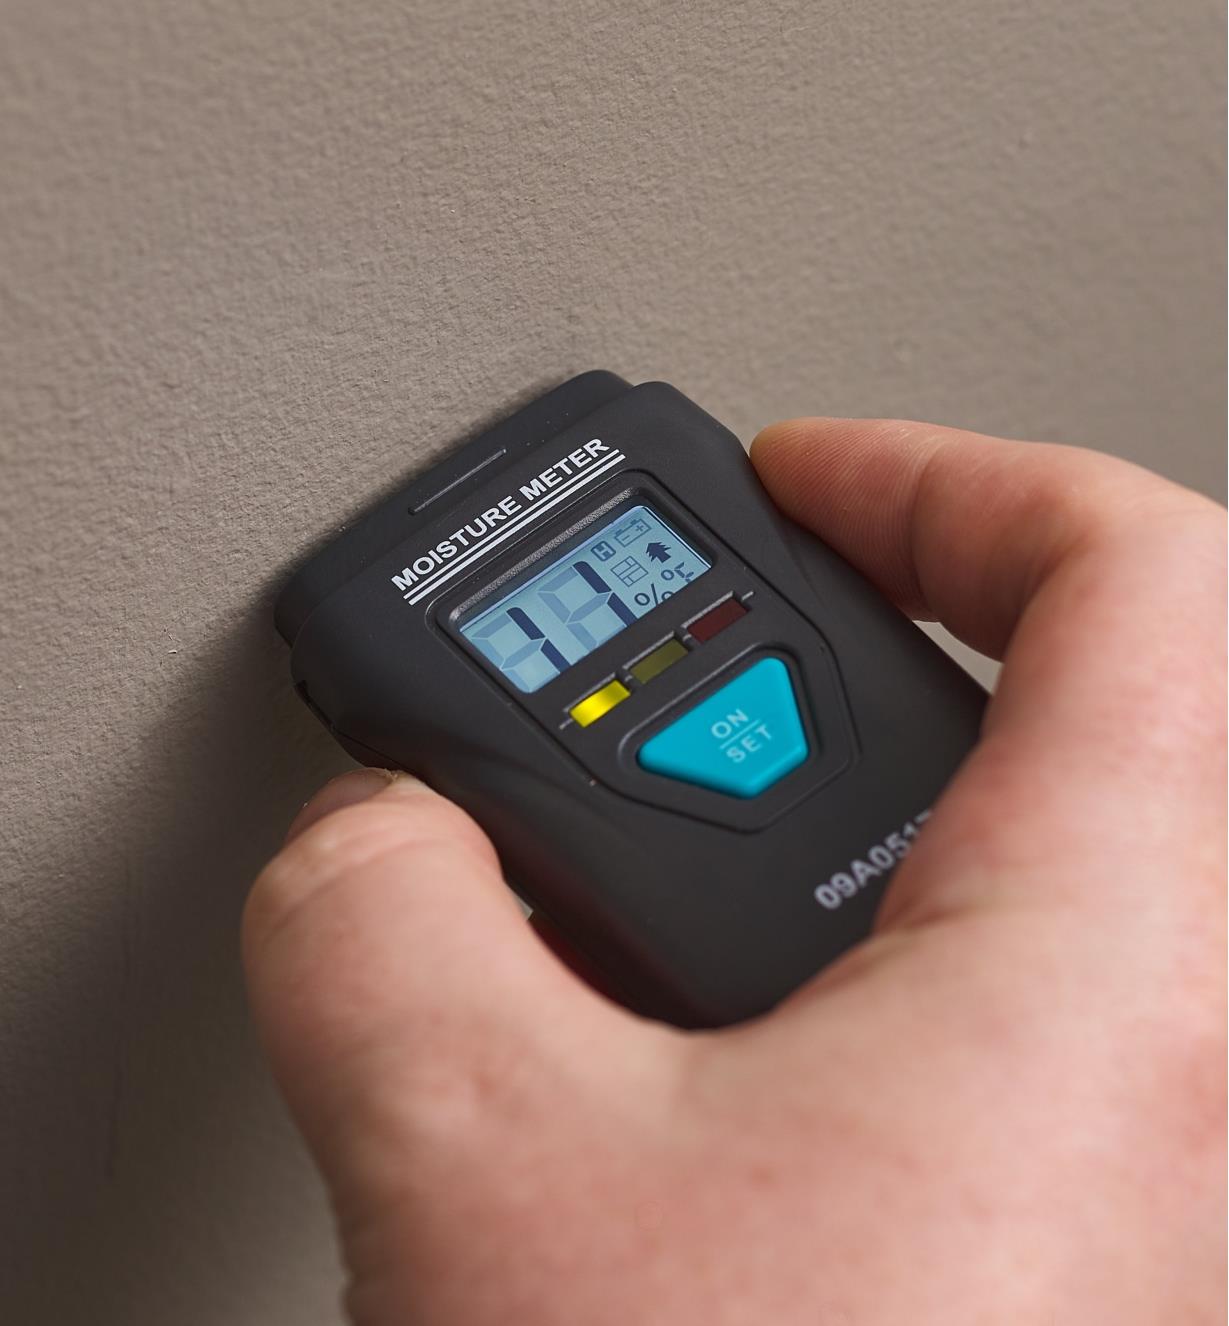 The Digital Moisture Meter being used to measure moisture in a wall, showing a percentage and a green LED indicator.